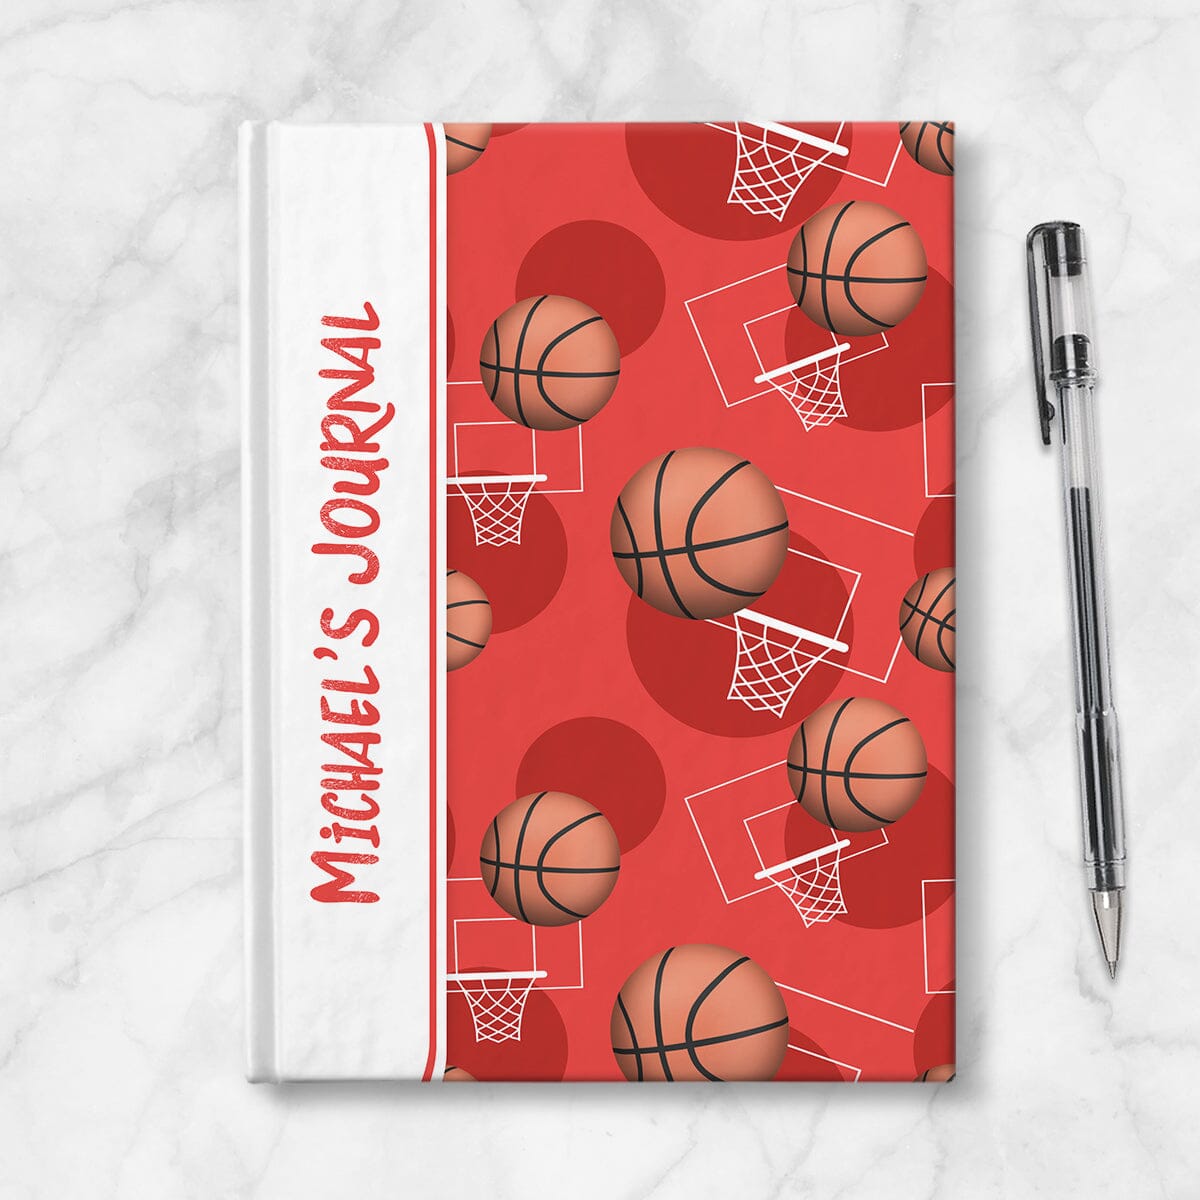 Personalized Red Basketball Journal at Artistically Invited. Image shows the book on a countertop next to a pen.